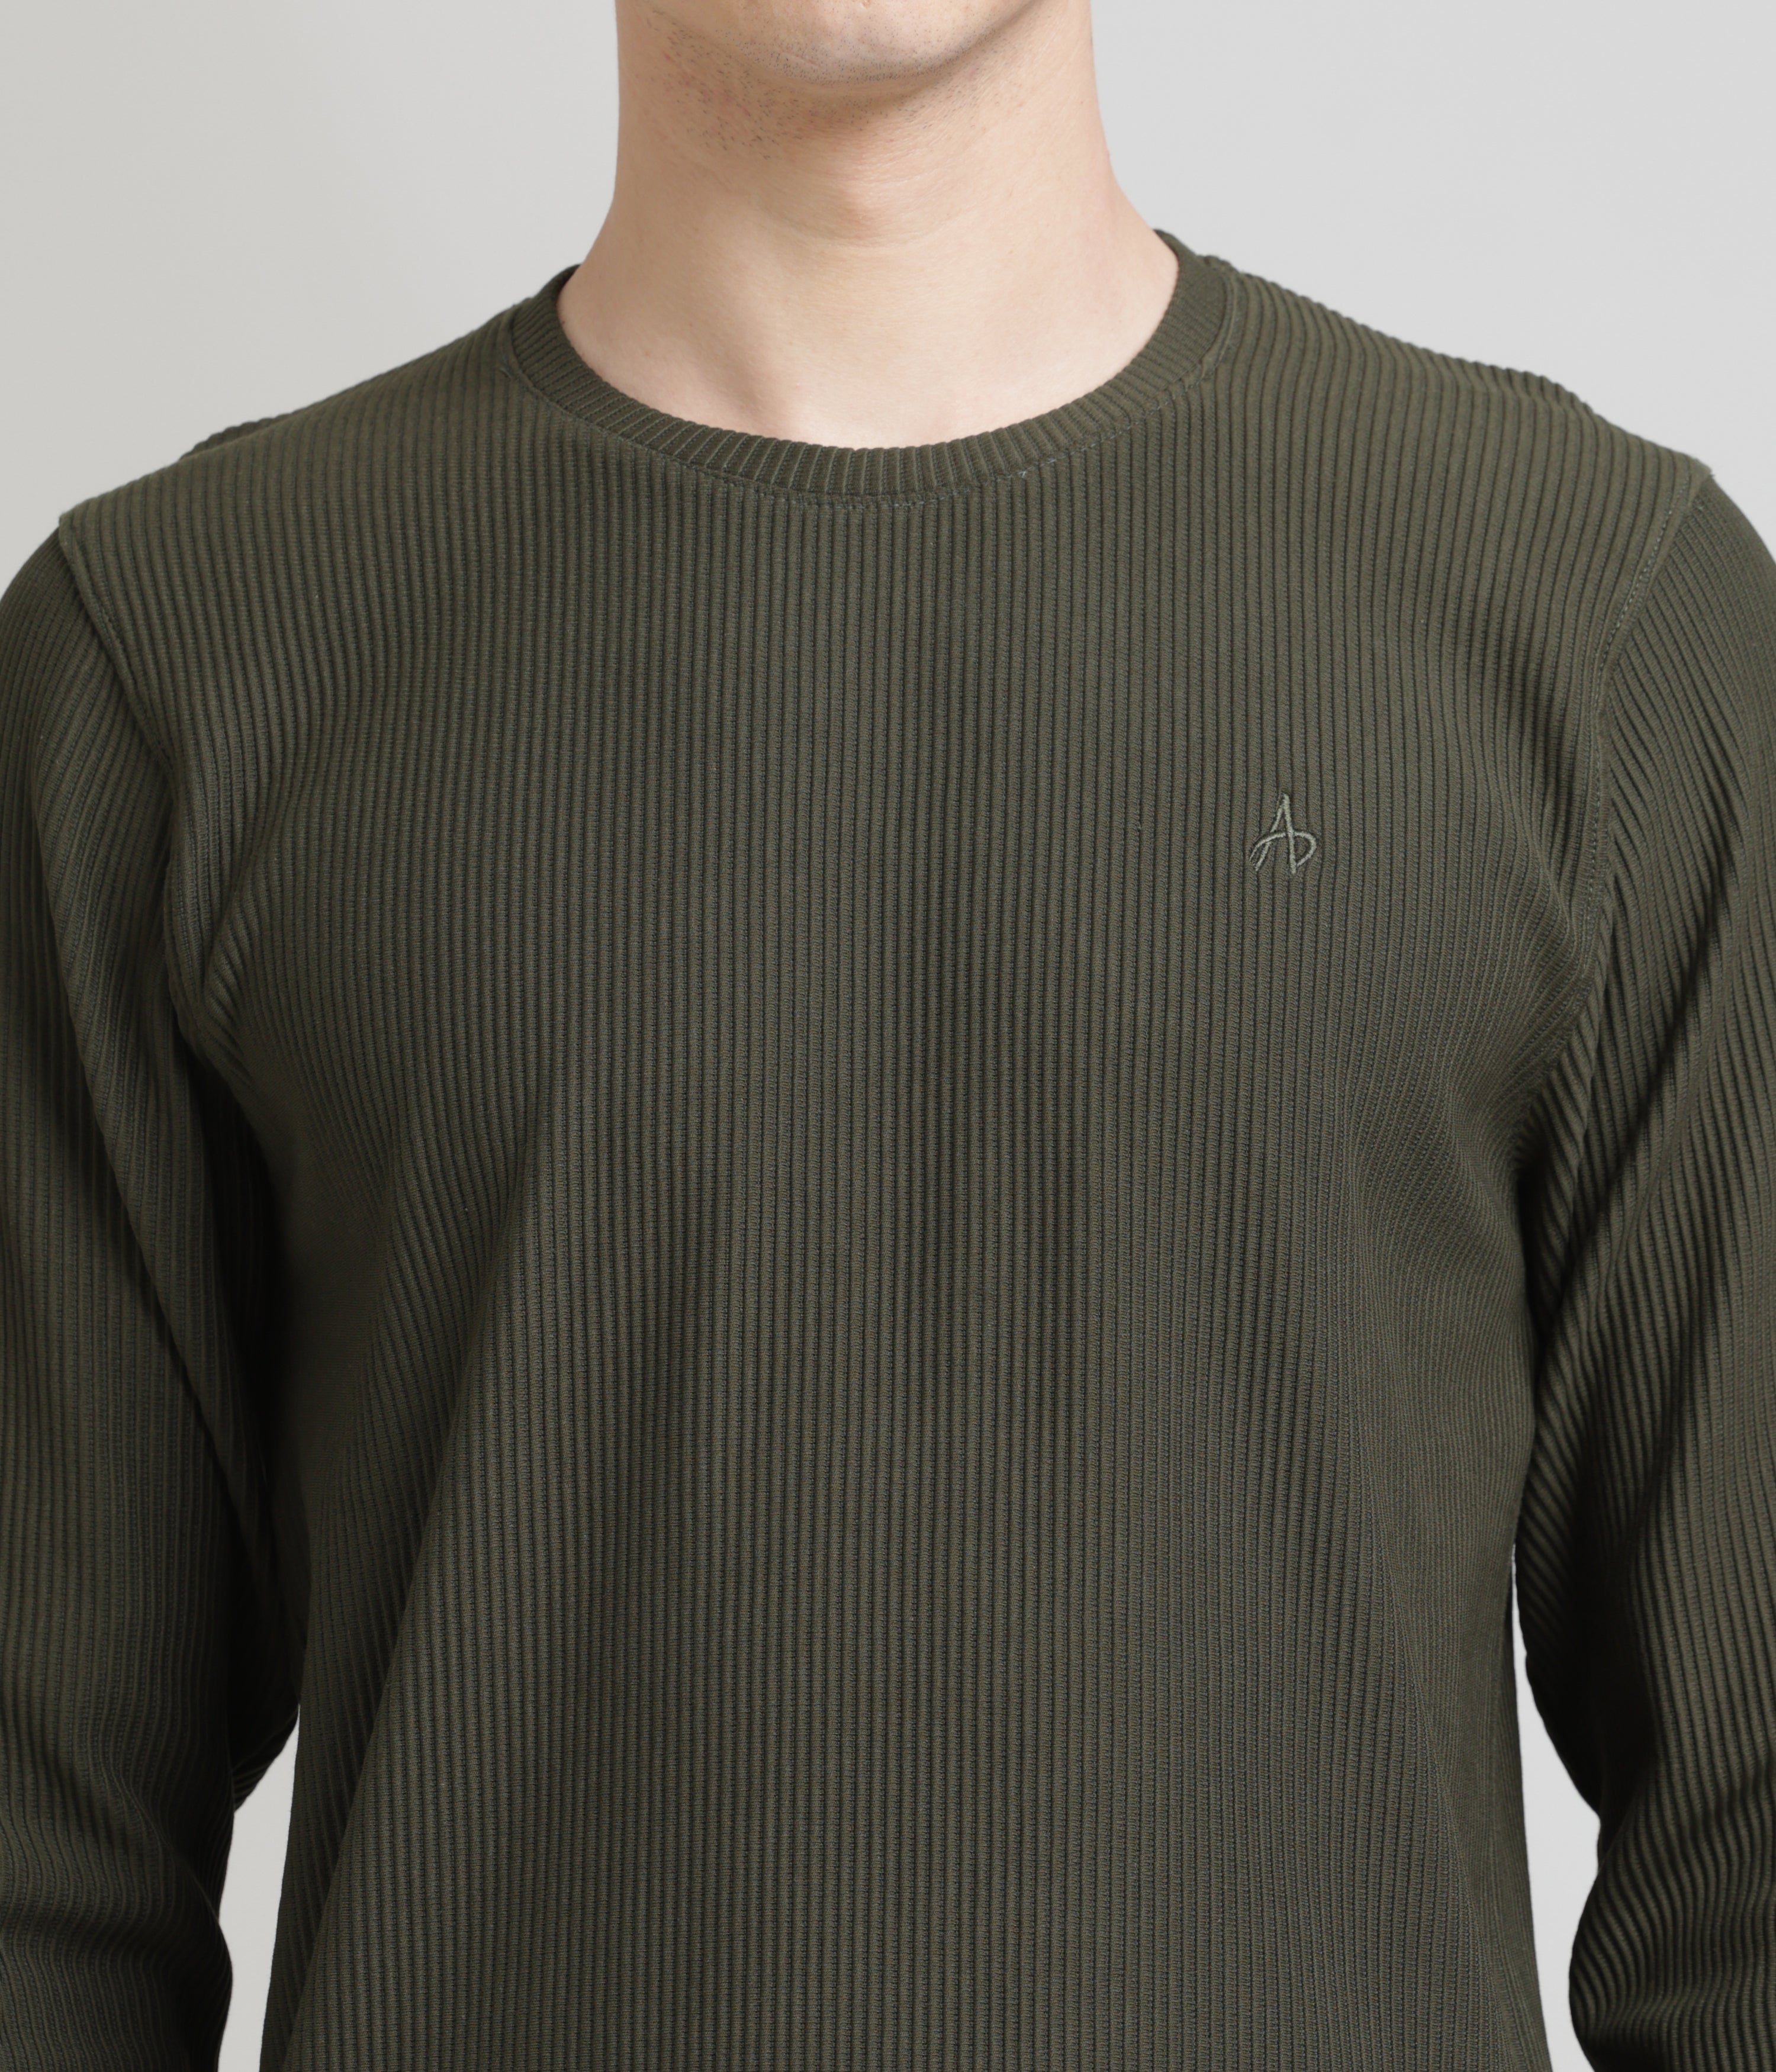 Green Regular Fit Sweatshirt: Casual Comfort for Chilly Days